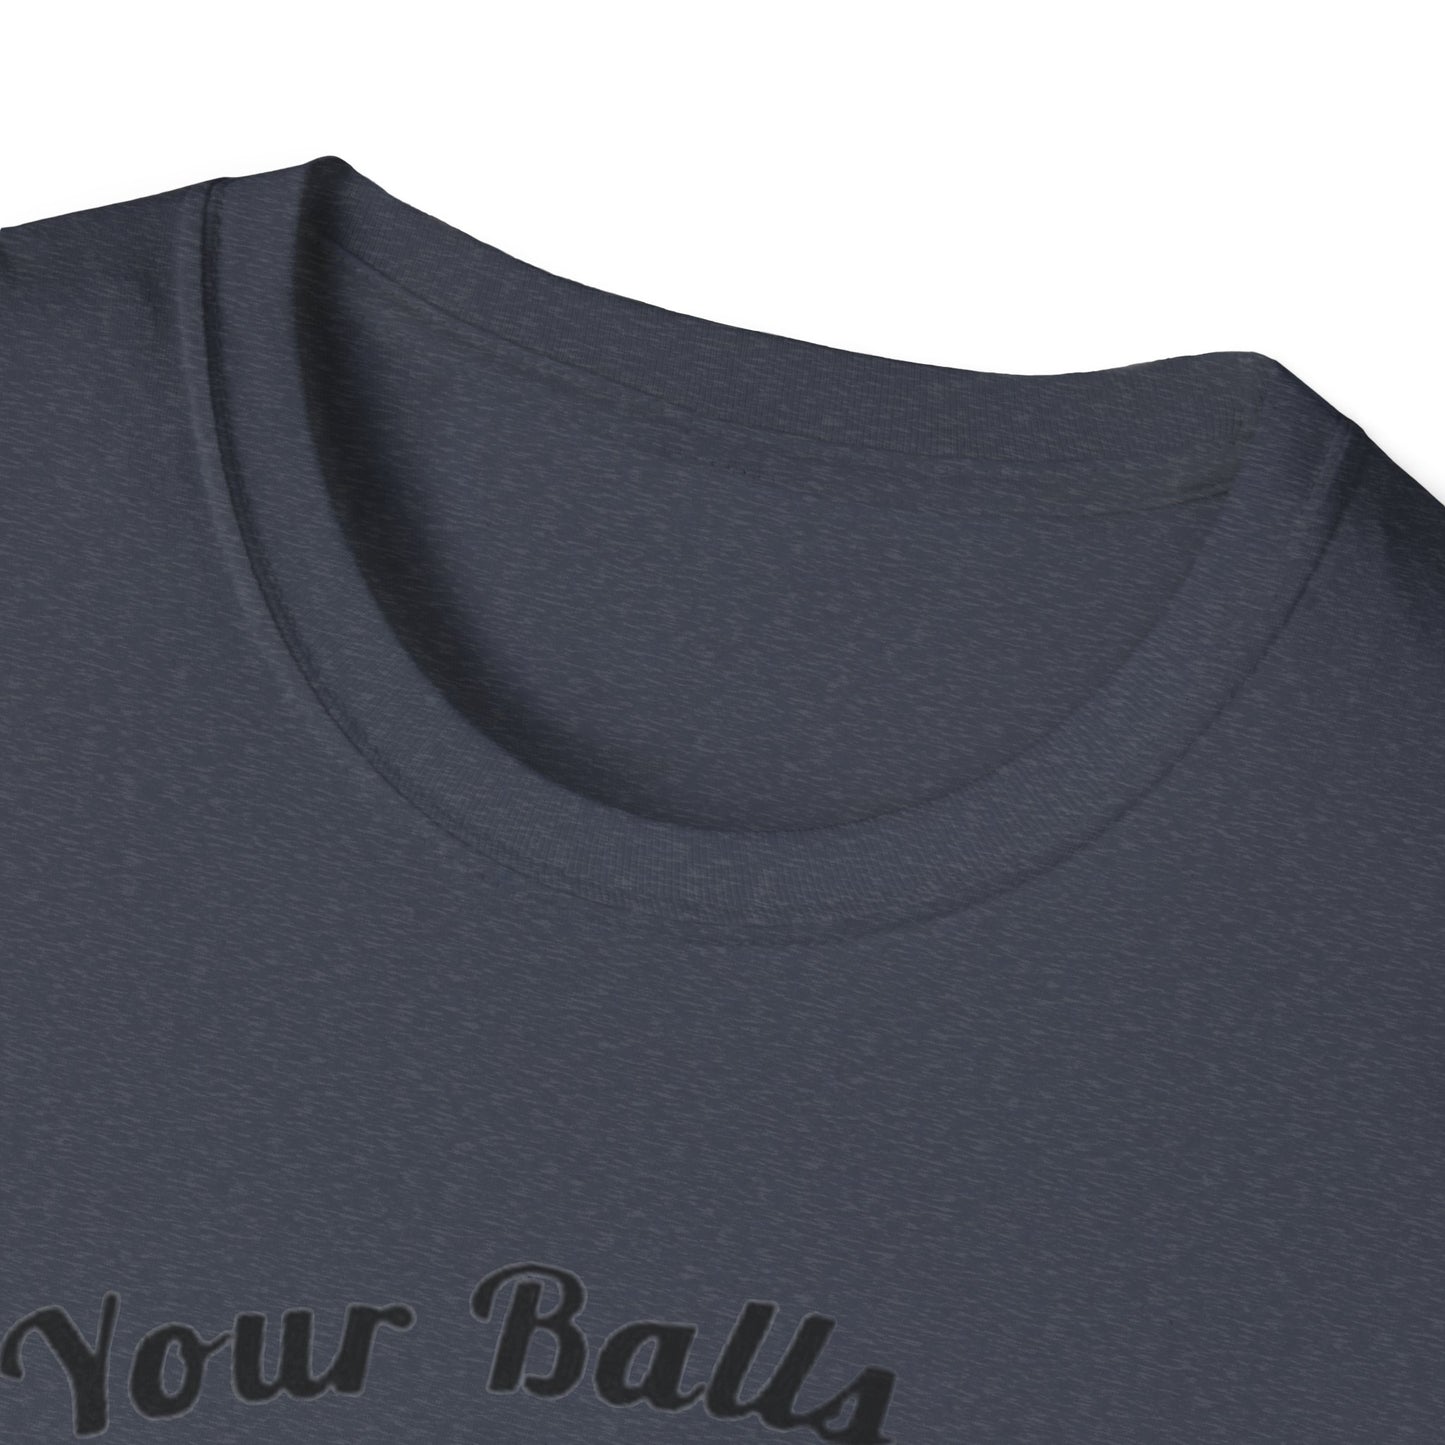 Copy of Grab your Balls Its canning Season - Unisex Softstyle T-Shirt